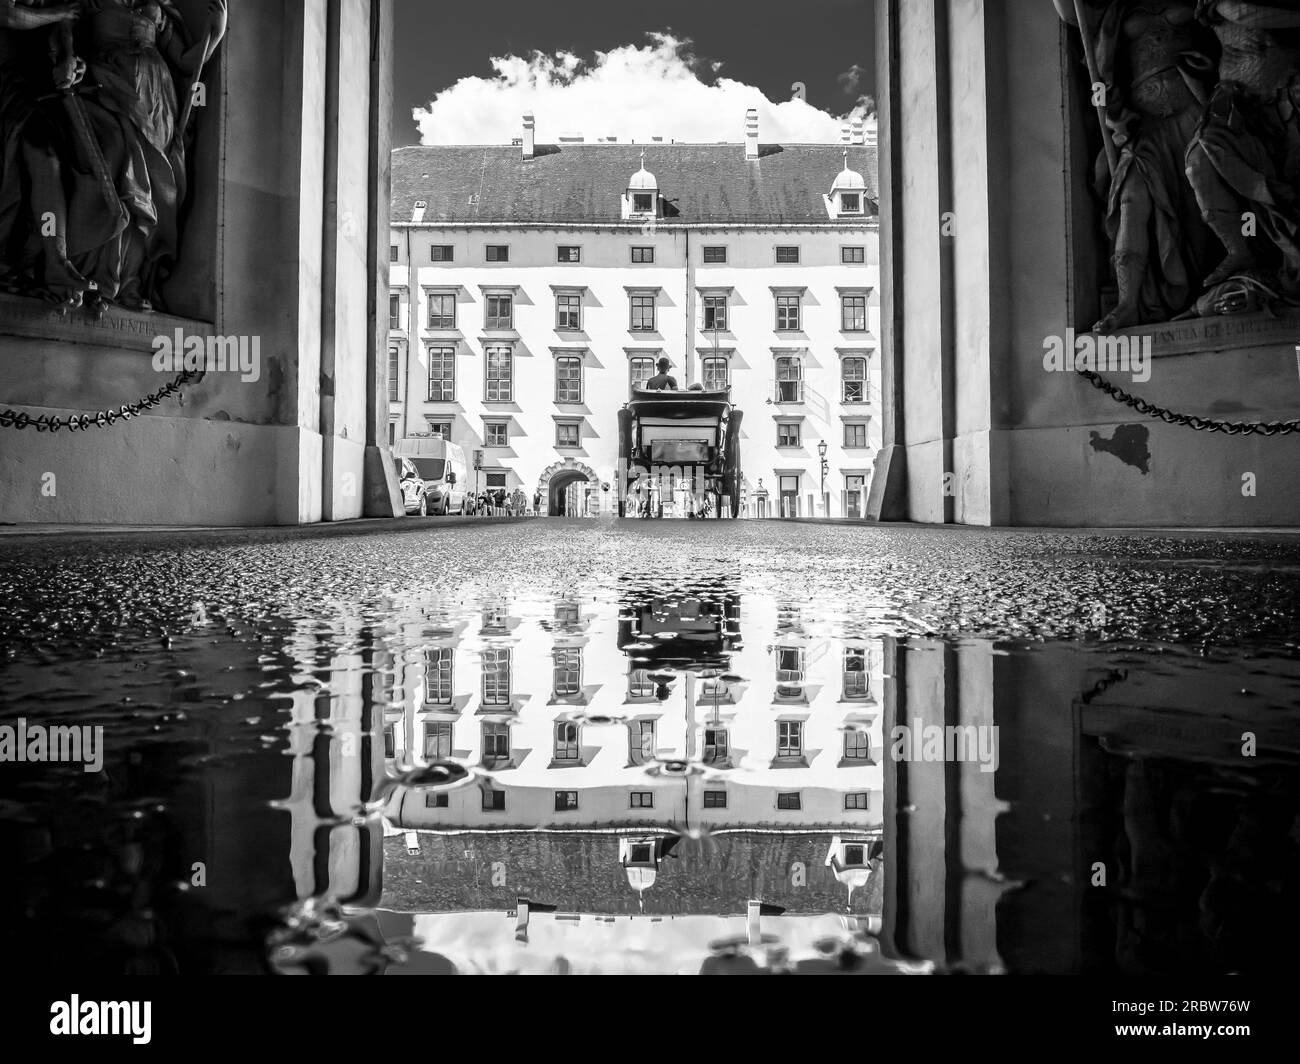 Wien Black and White Stock Photos & Images - Alamy